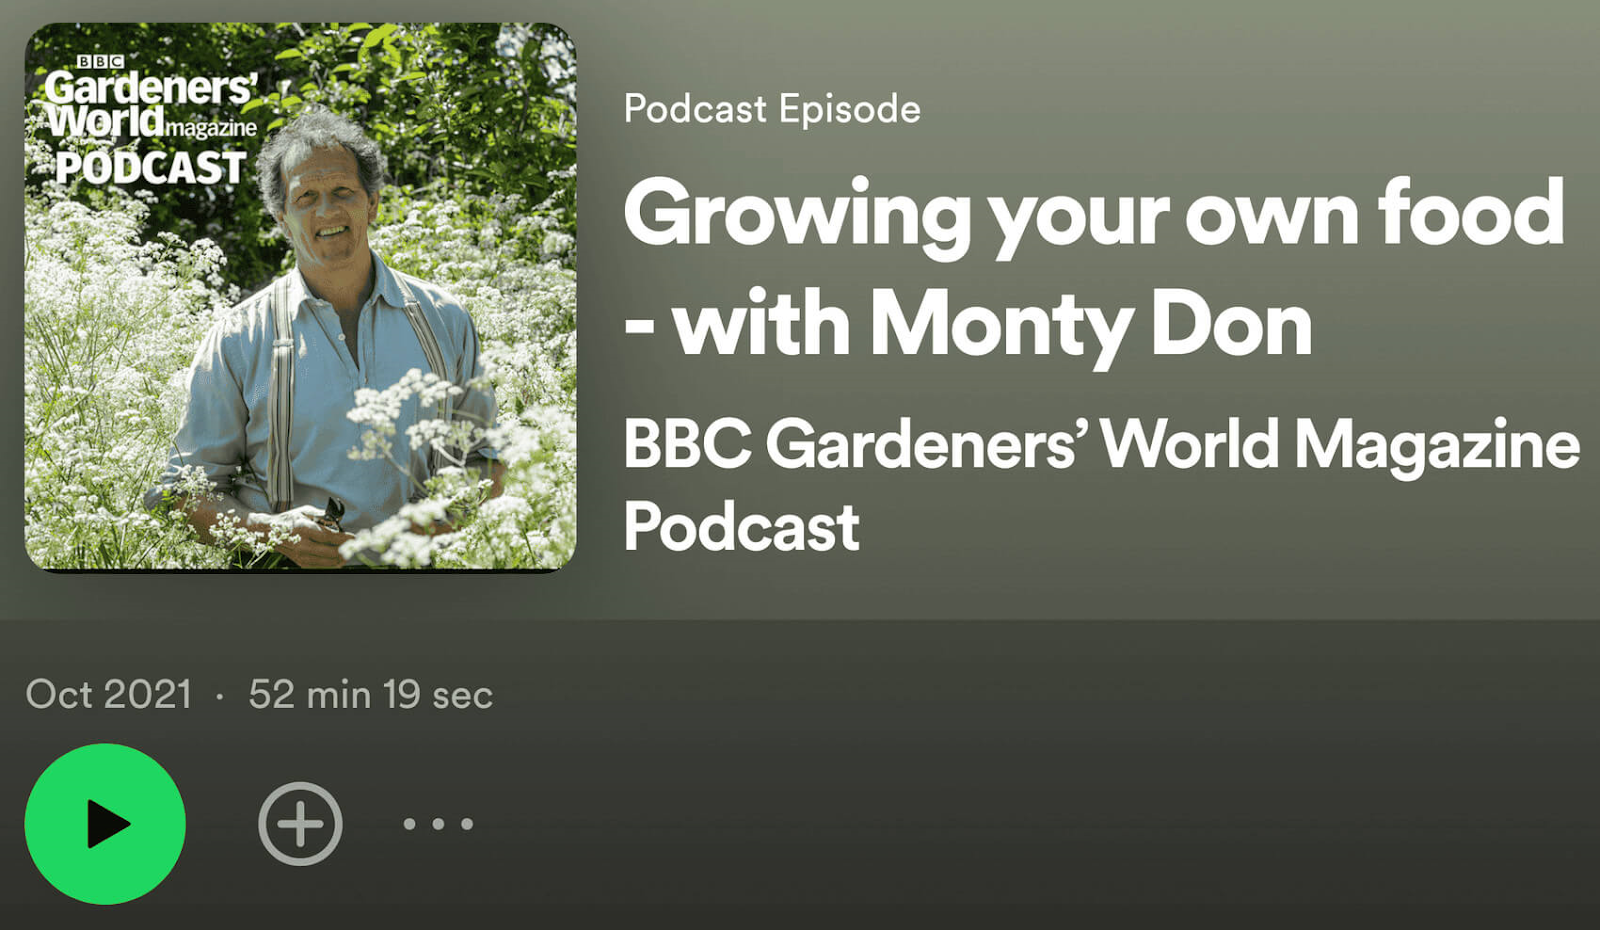 “Growing Your Own Food - With Monty Don" podcast episode page